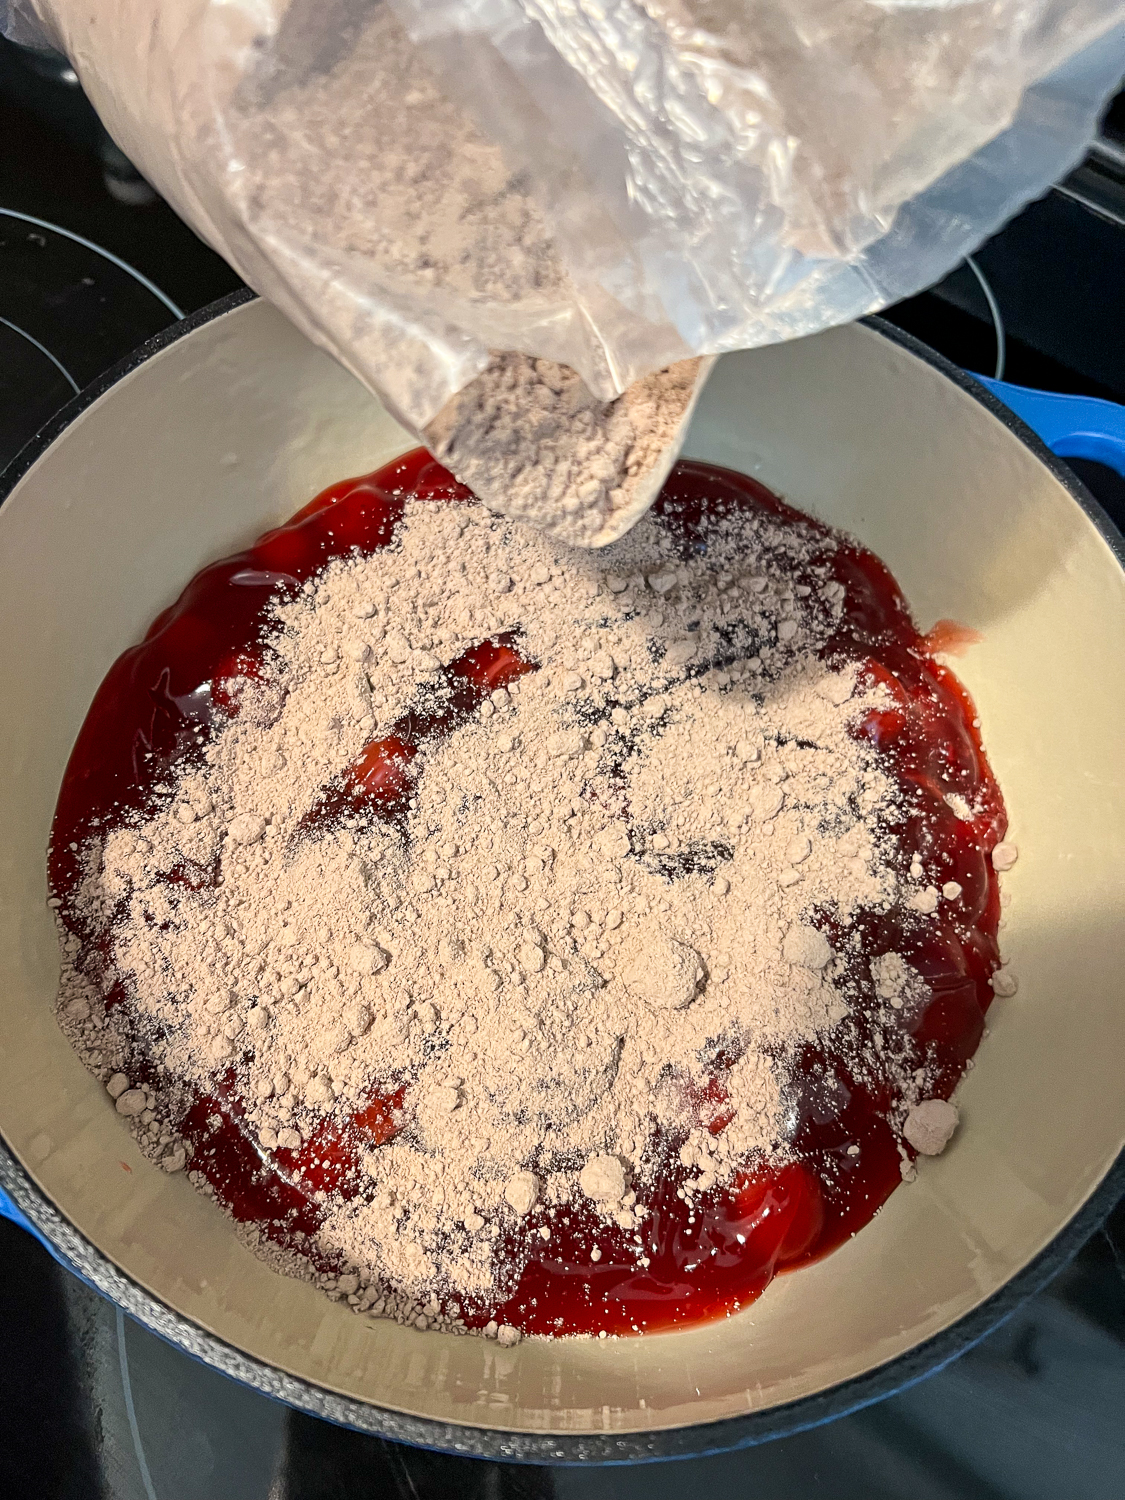 Devil's Food cake mix being sprinkled over the cherry pie filling in the dutch oven.